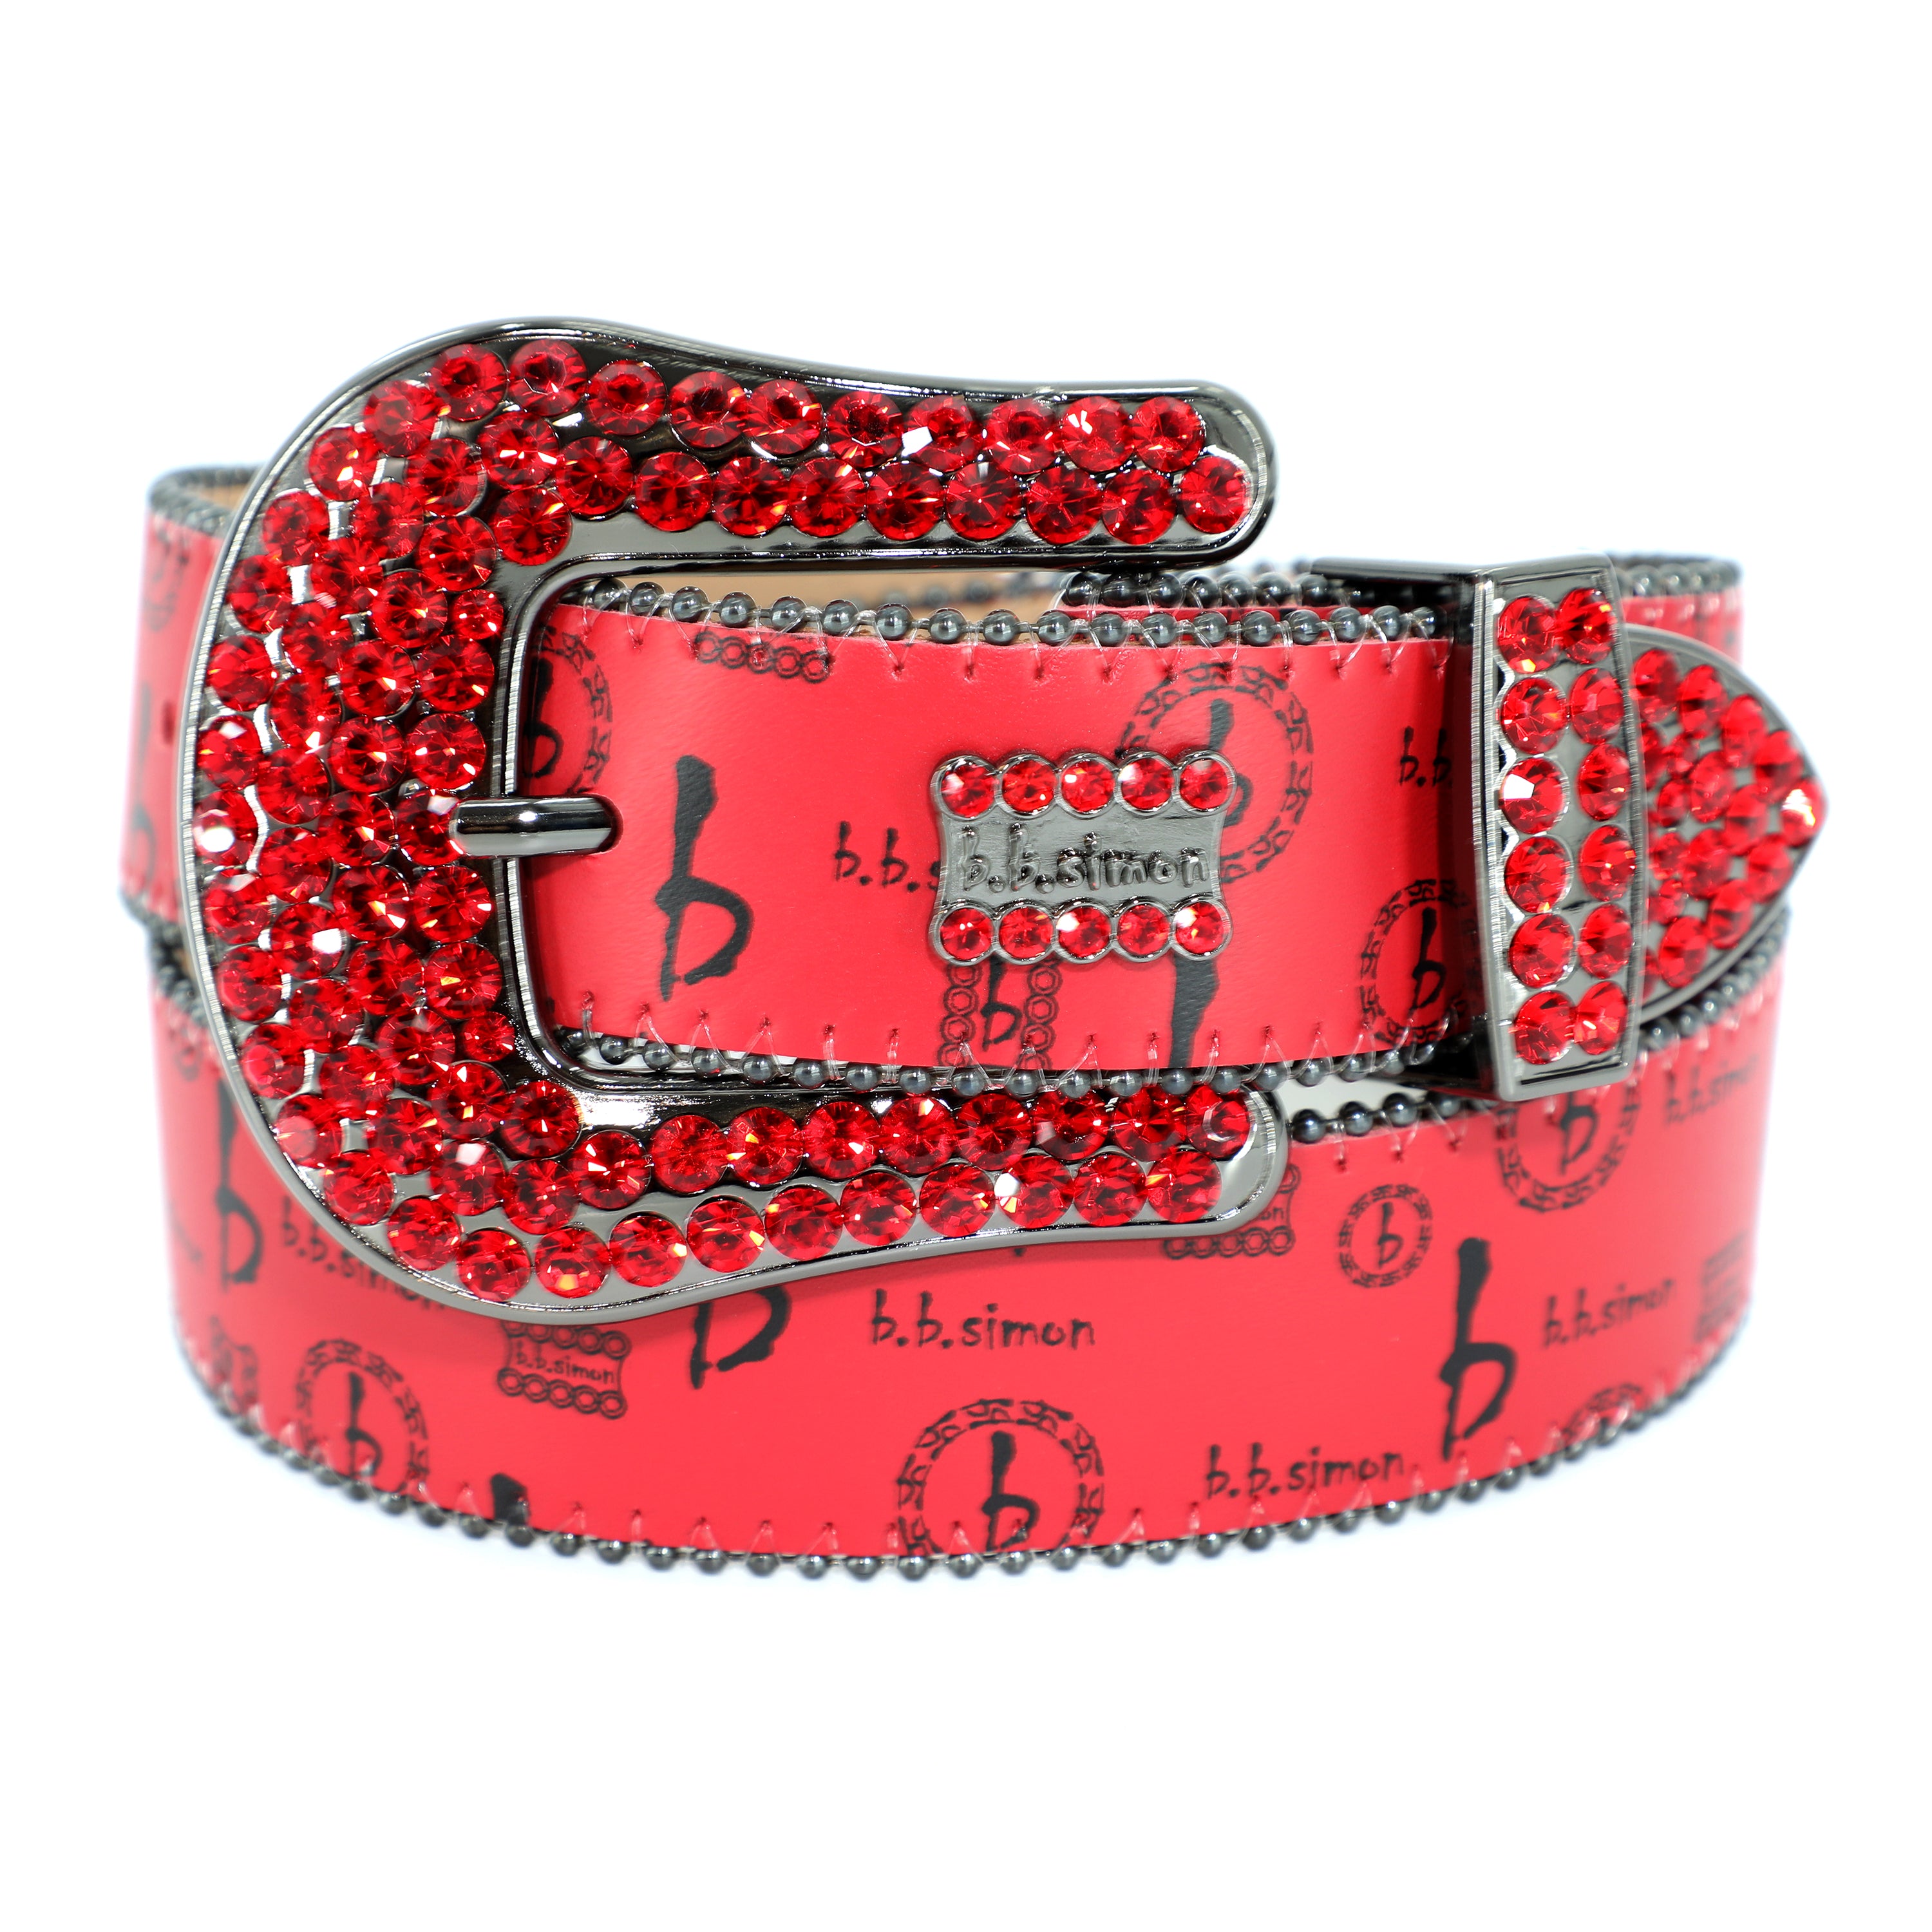 New and used B.B. Simon Women's Belts for sale